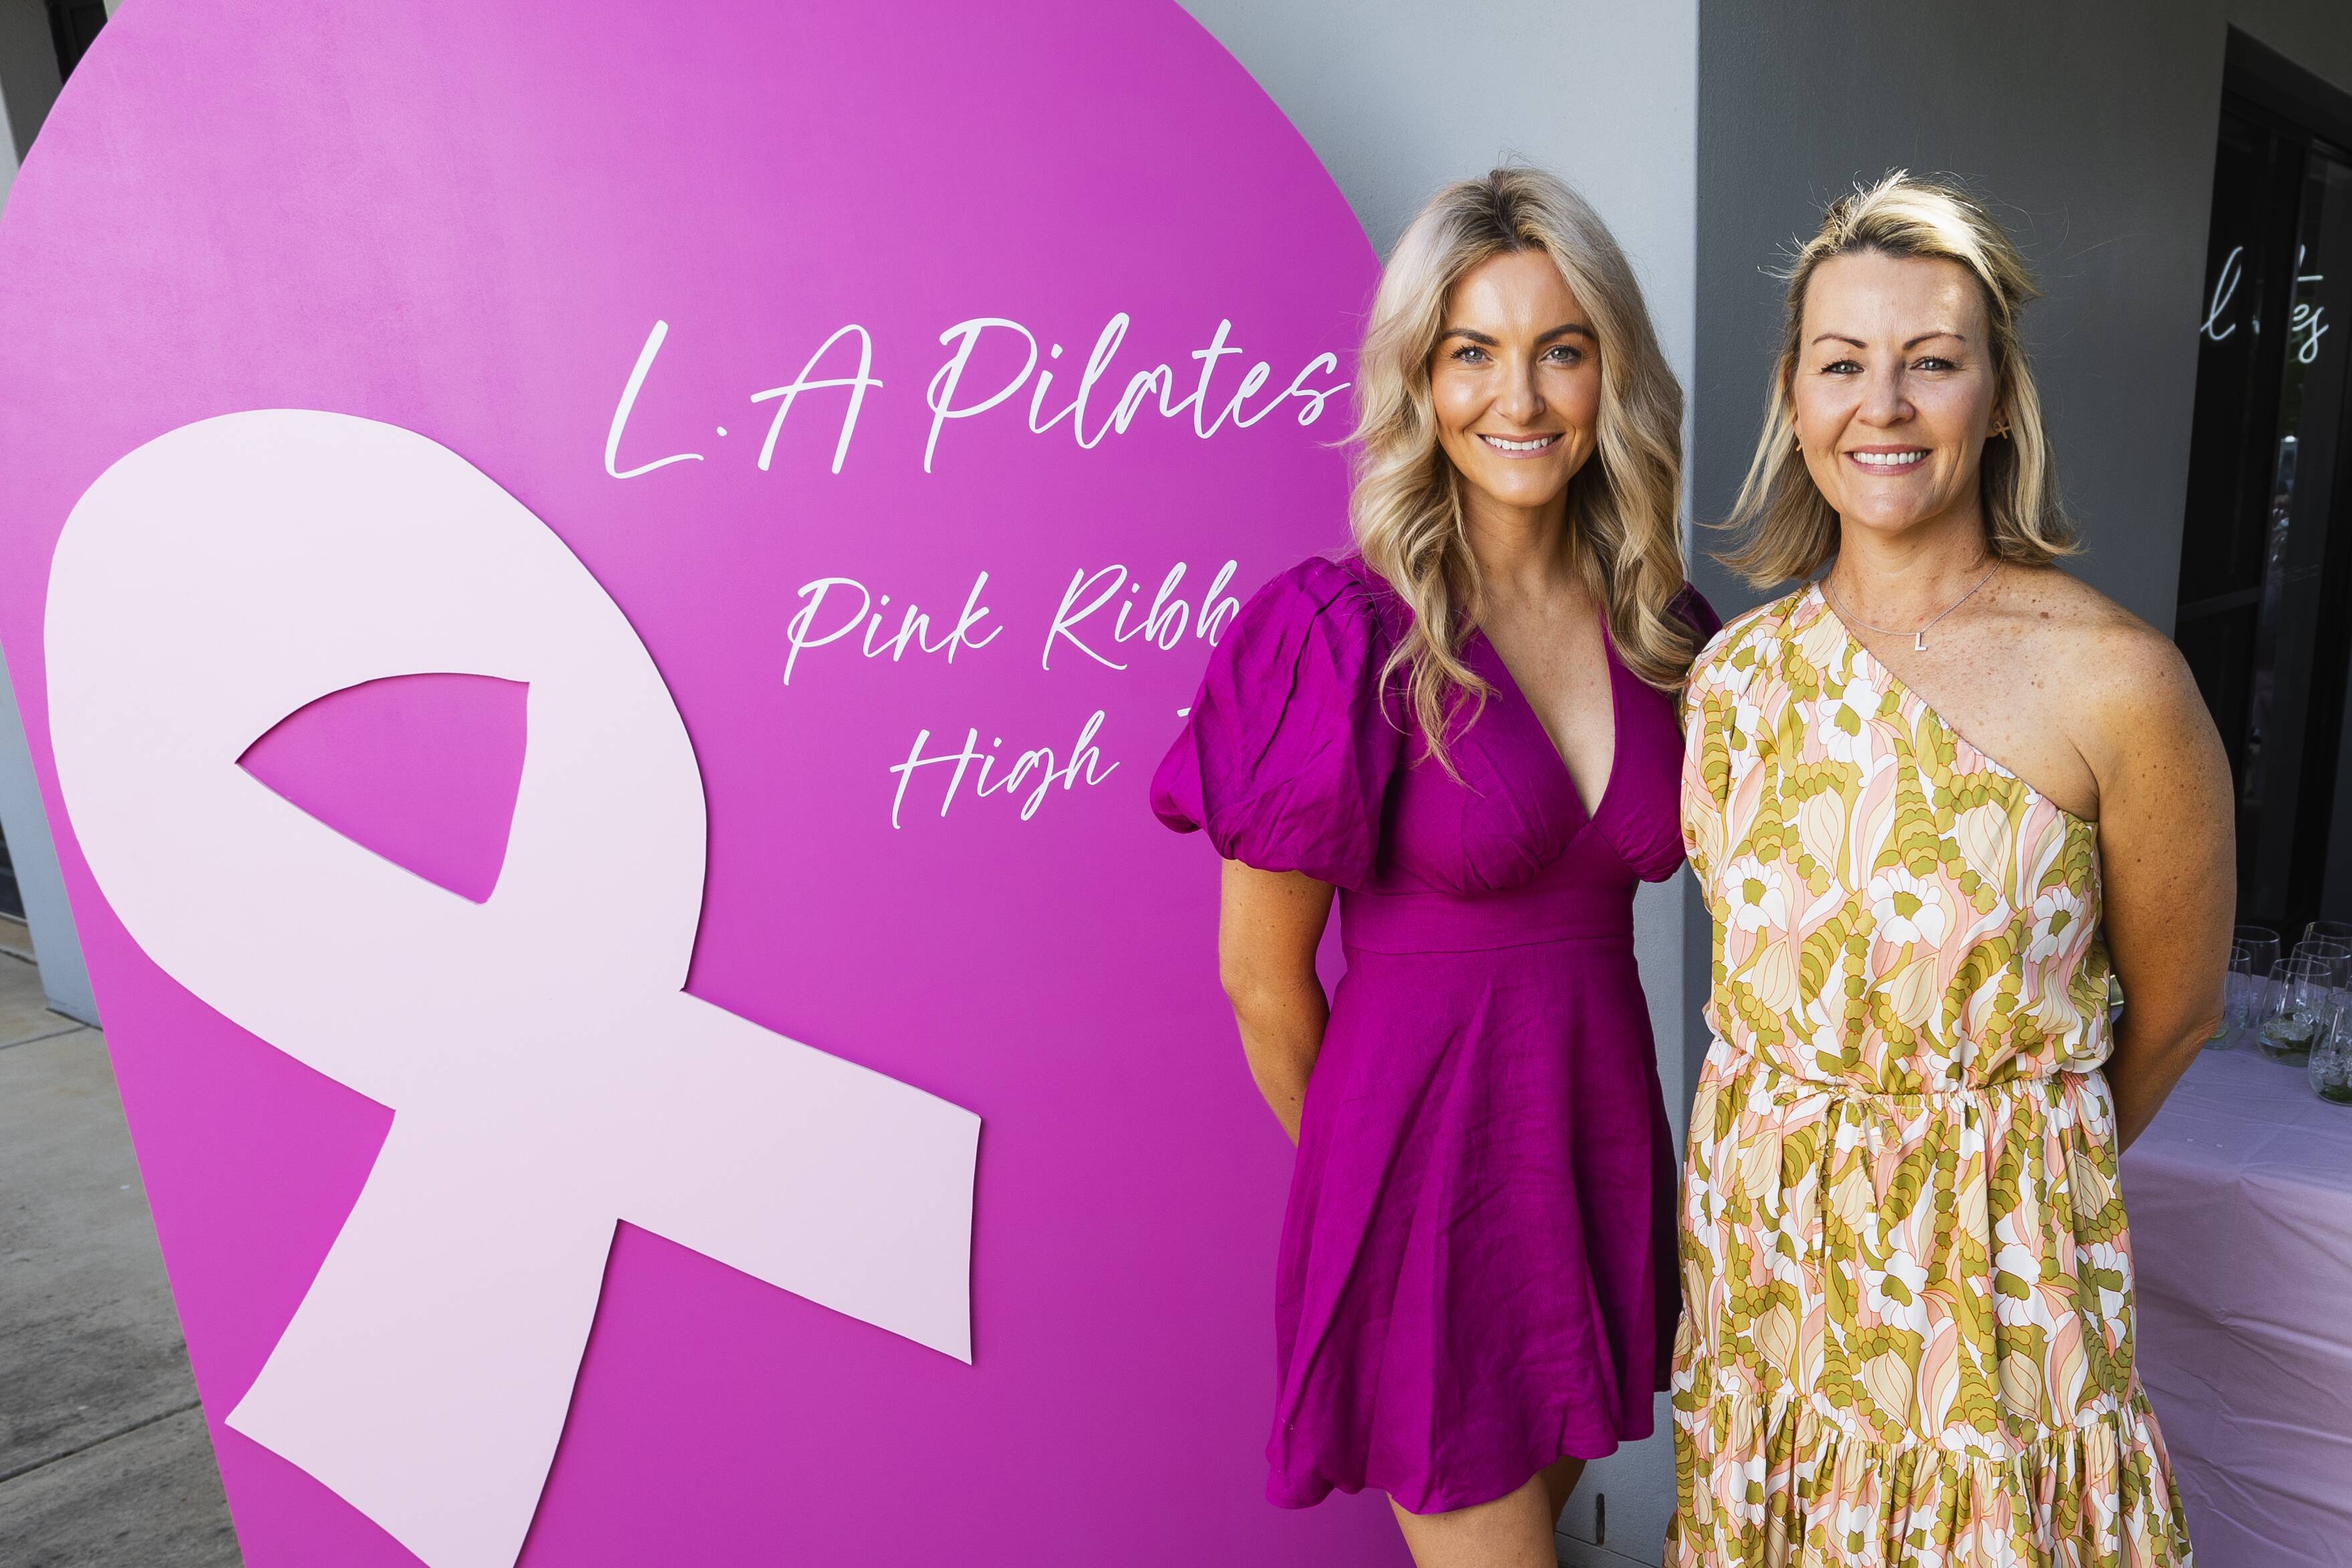 L.A Pilates Pink Ribbon High Tea fundraiser raises $12,000 for Breast Cancer  Foundation, The Daily Advertiser